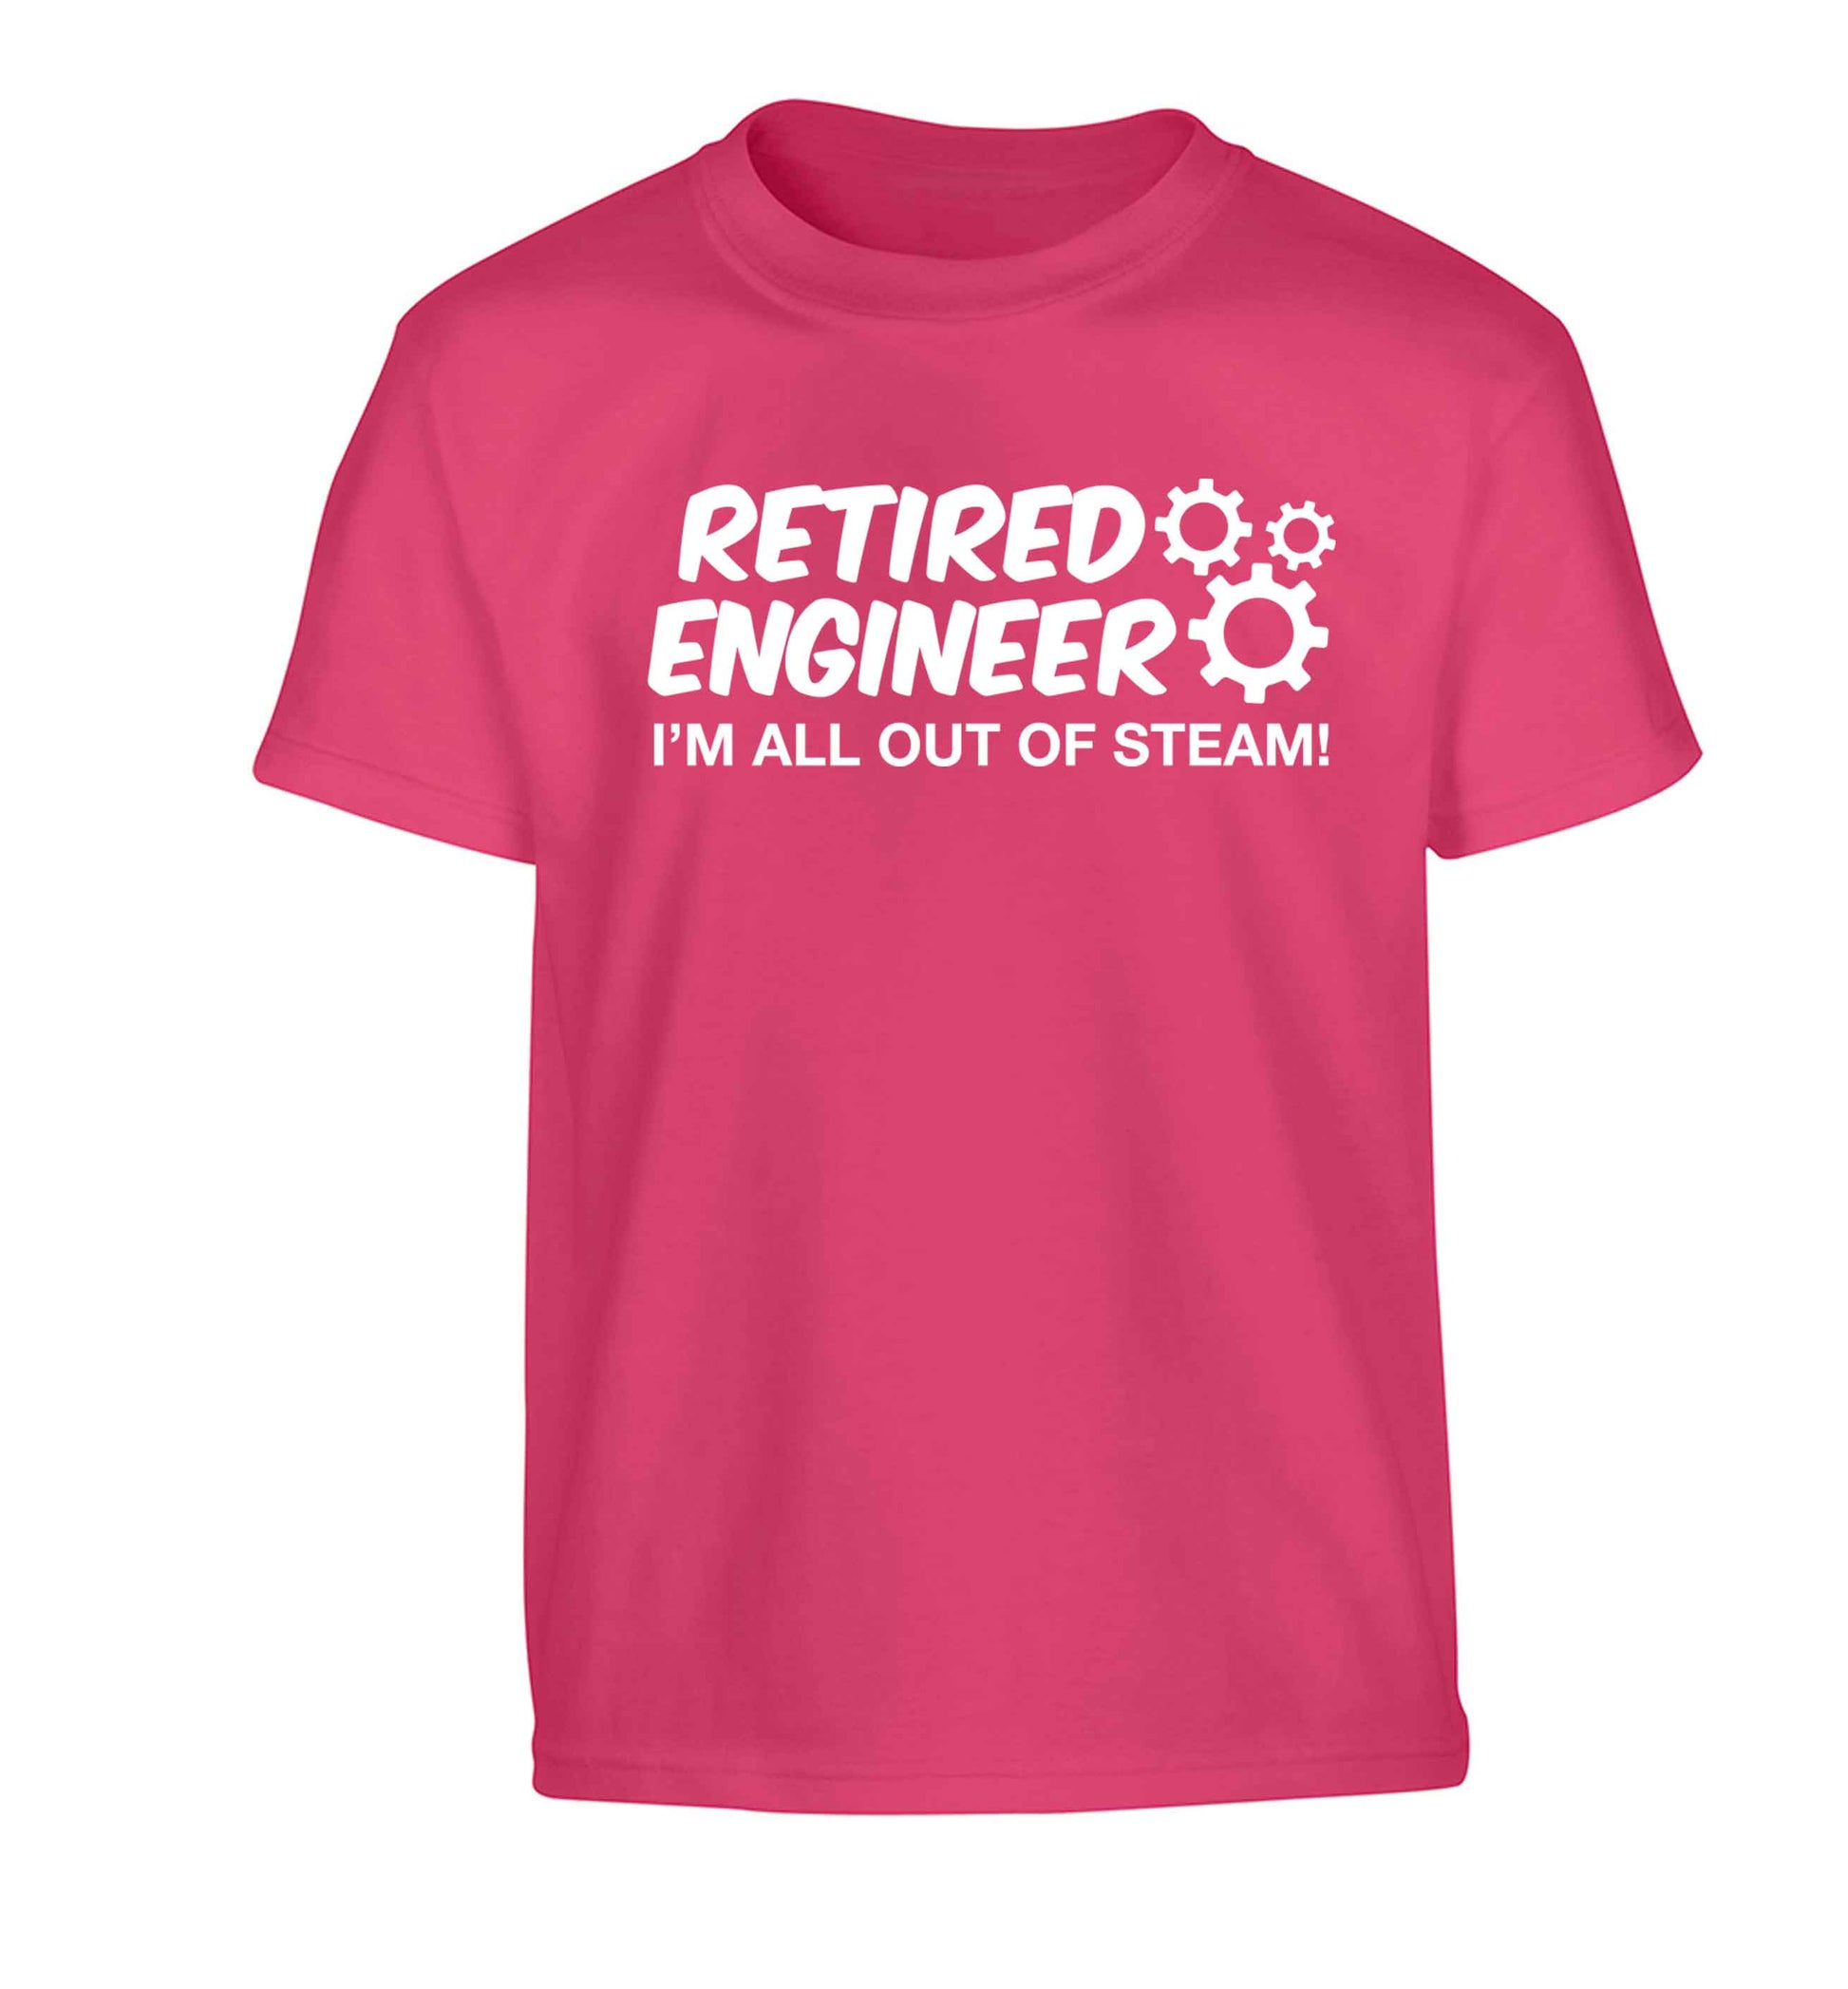 Retired engineer I'm all out of steam Children's pink Tshirt 12-13 Years